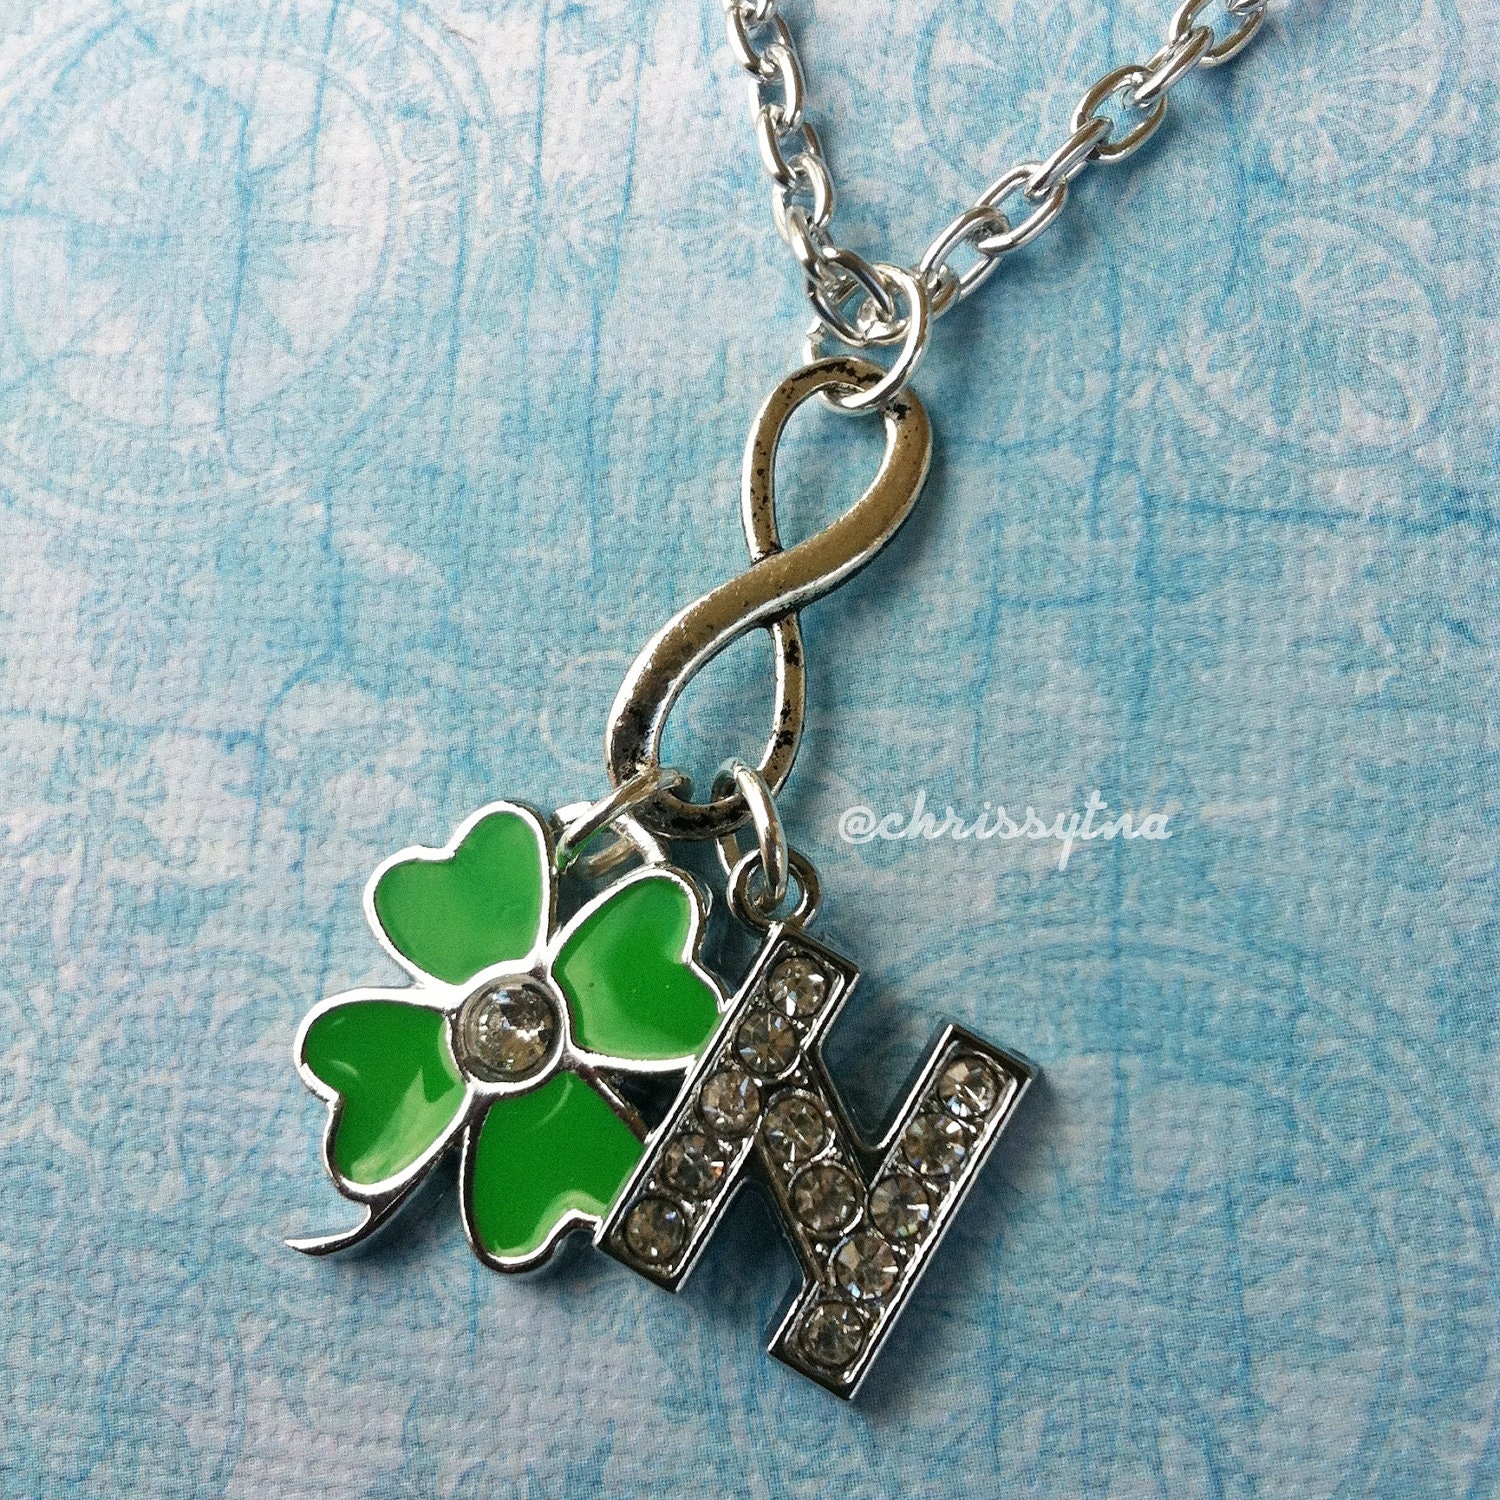 One Direction inspired necklace // Niall Horan Infinity Necklace